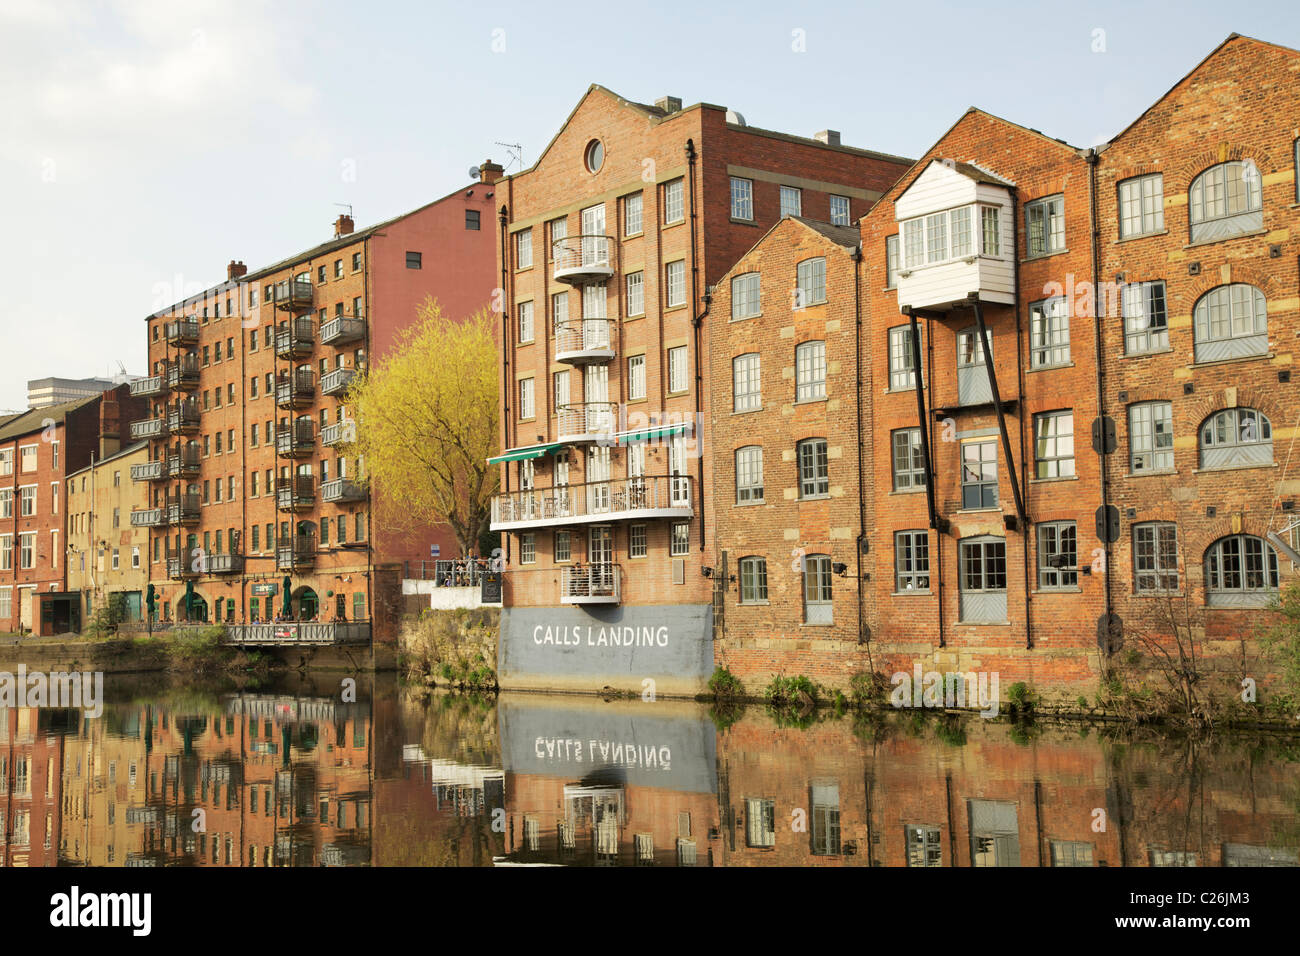 Calls Landing on the river aire Leeds apartments and restaurants Stock Photo